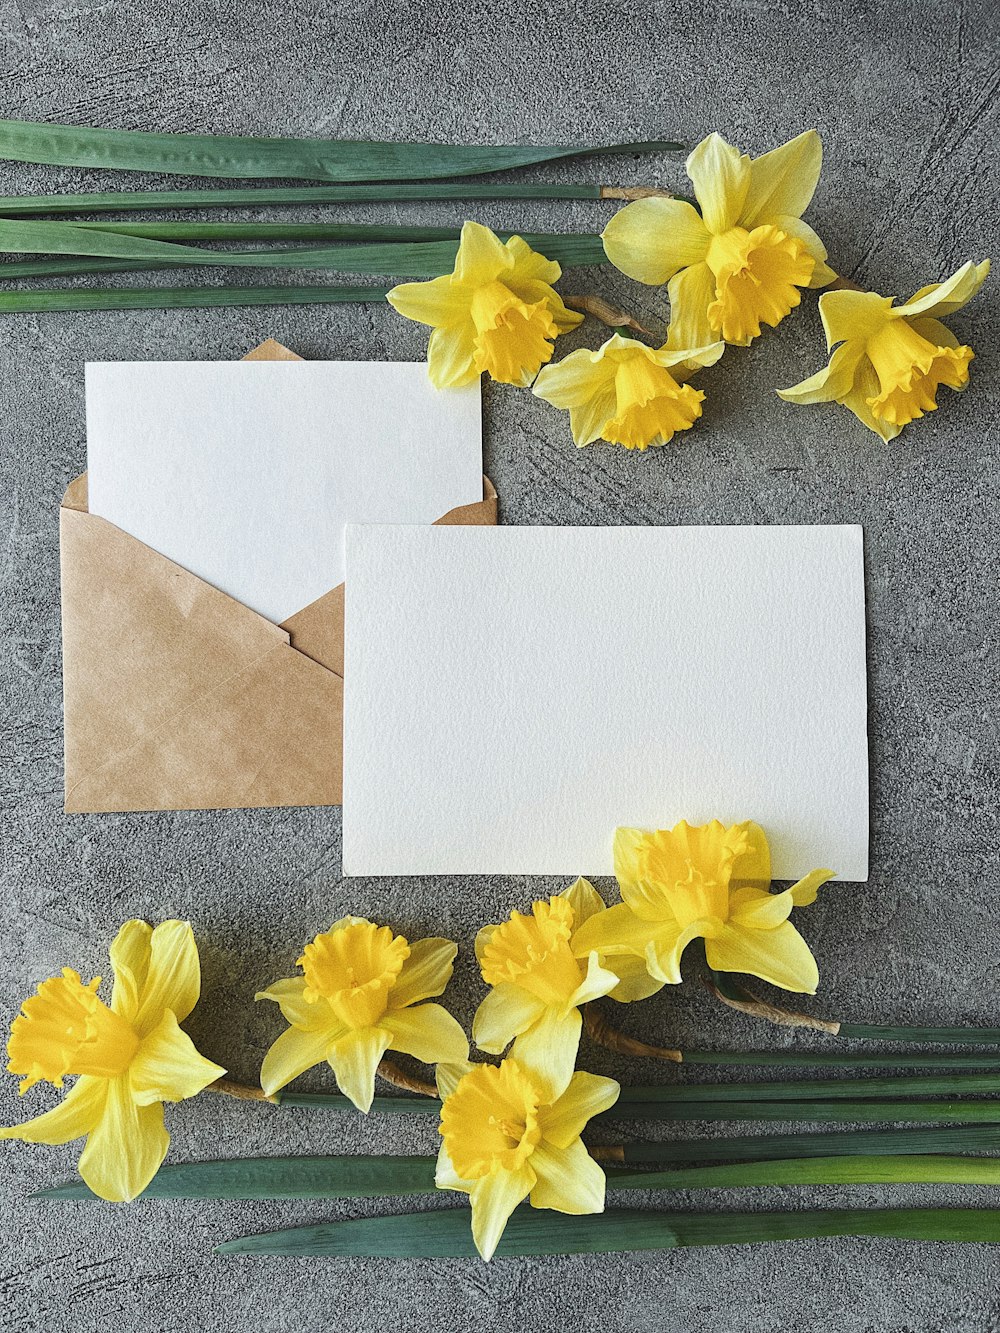 yellow daffodils and a letter on a table